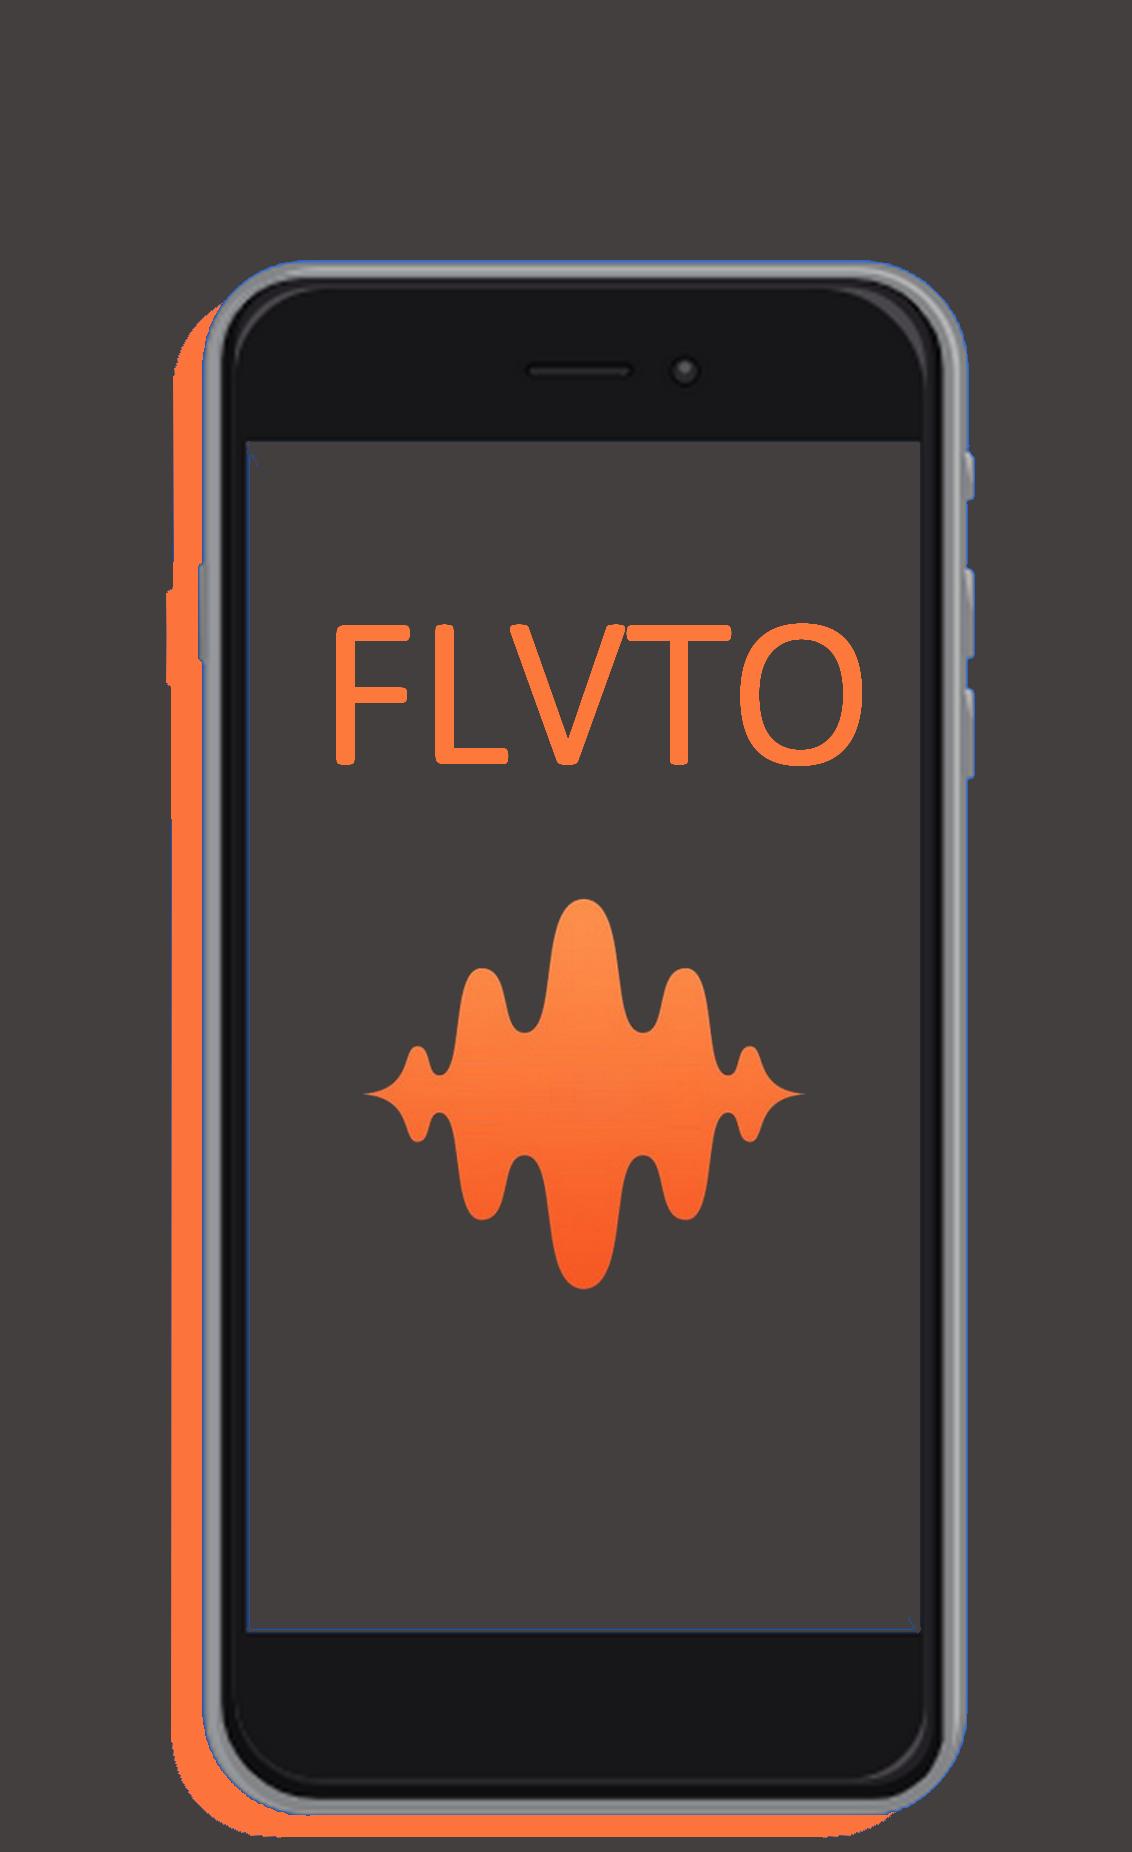 FLVto Converter mp3 for Android - APK Download